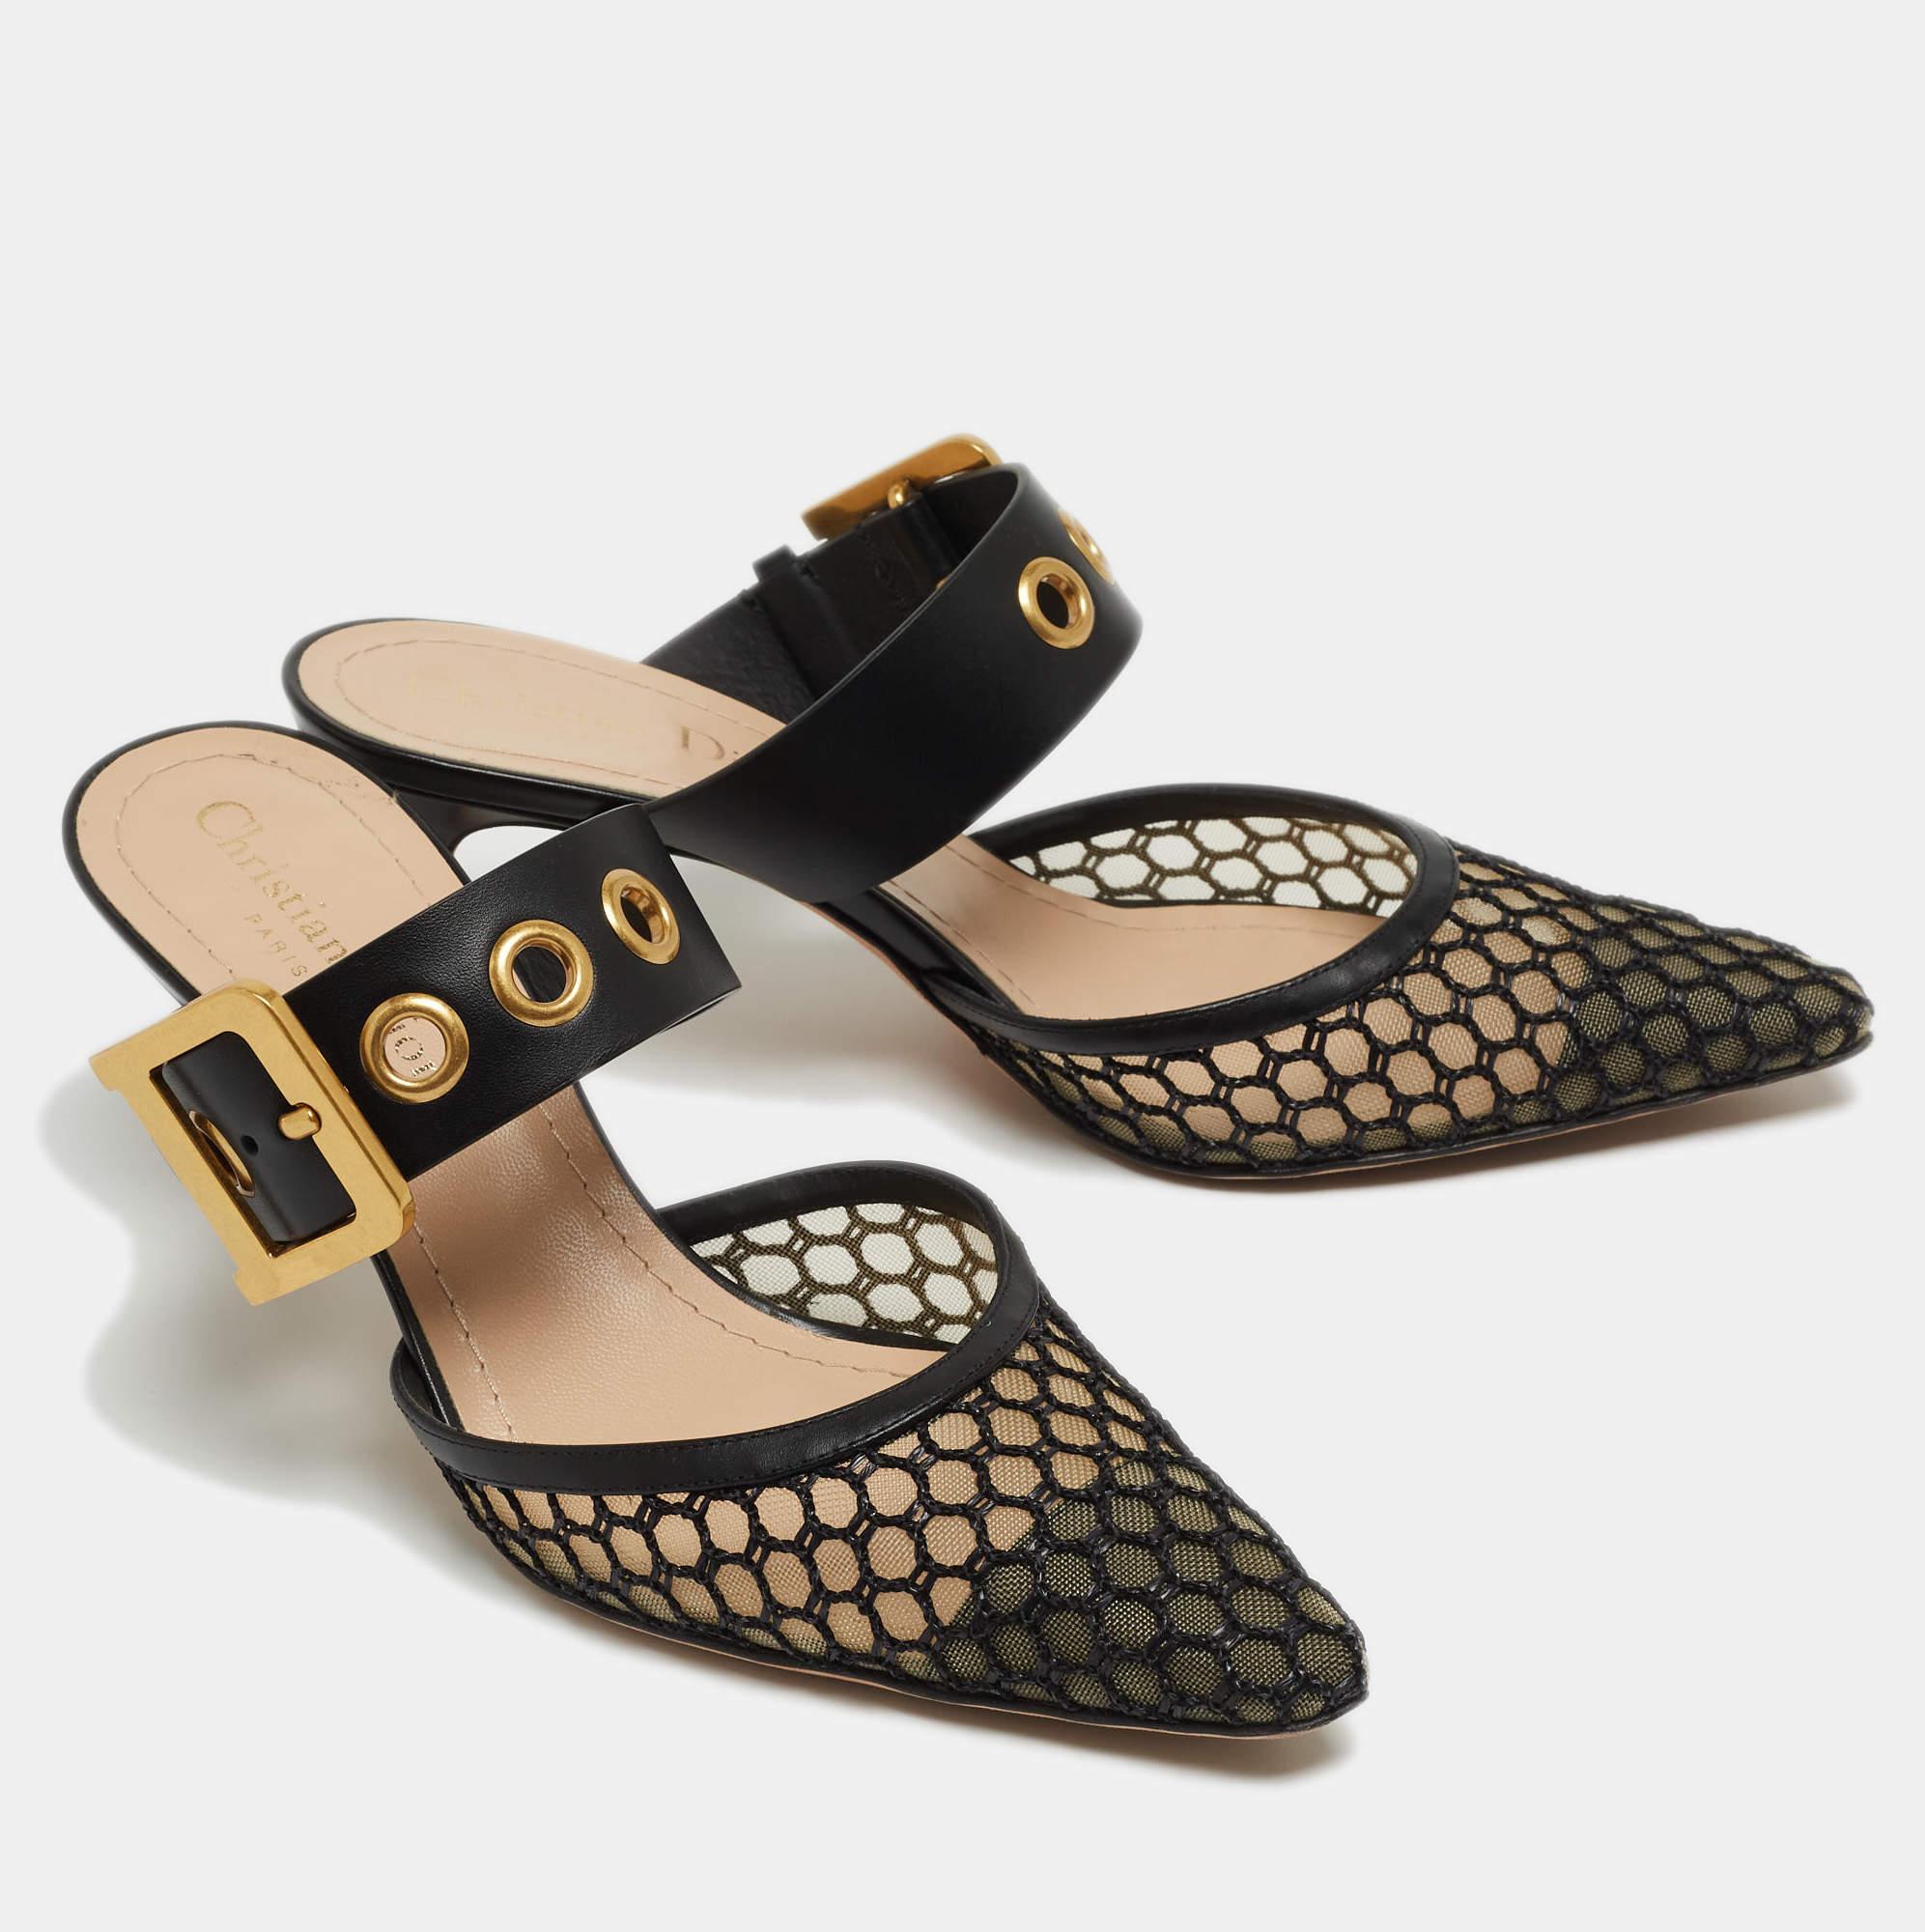 Elevate your look without compromising on comfort when you slip into these mules. Made from the finest material, the mules are perfect for any occasion and will leave you feeling confident each time you slip them on.

Includes
Original Dustbag